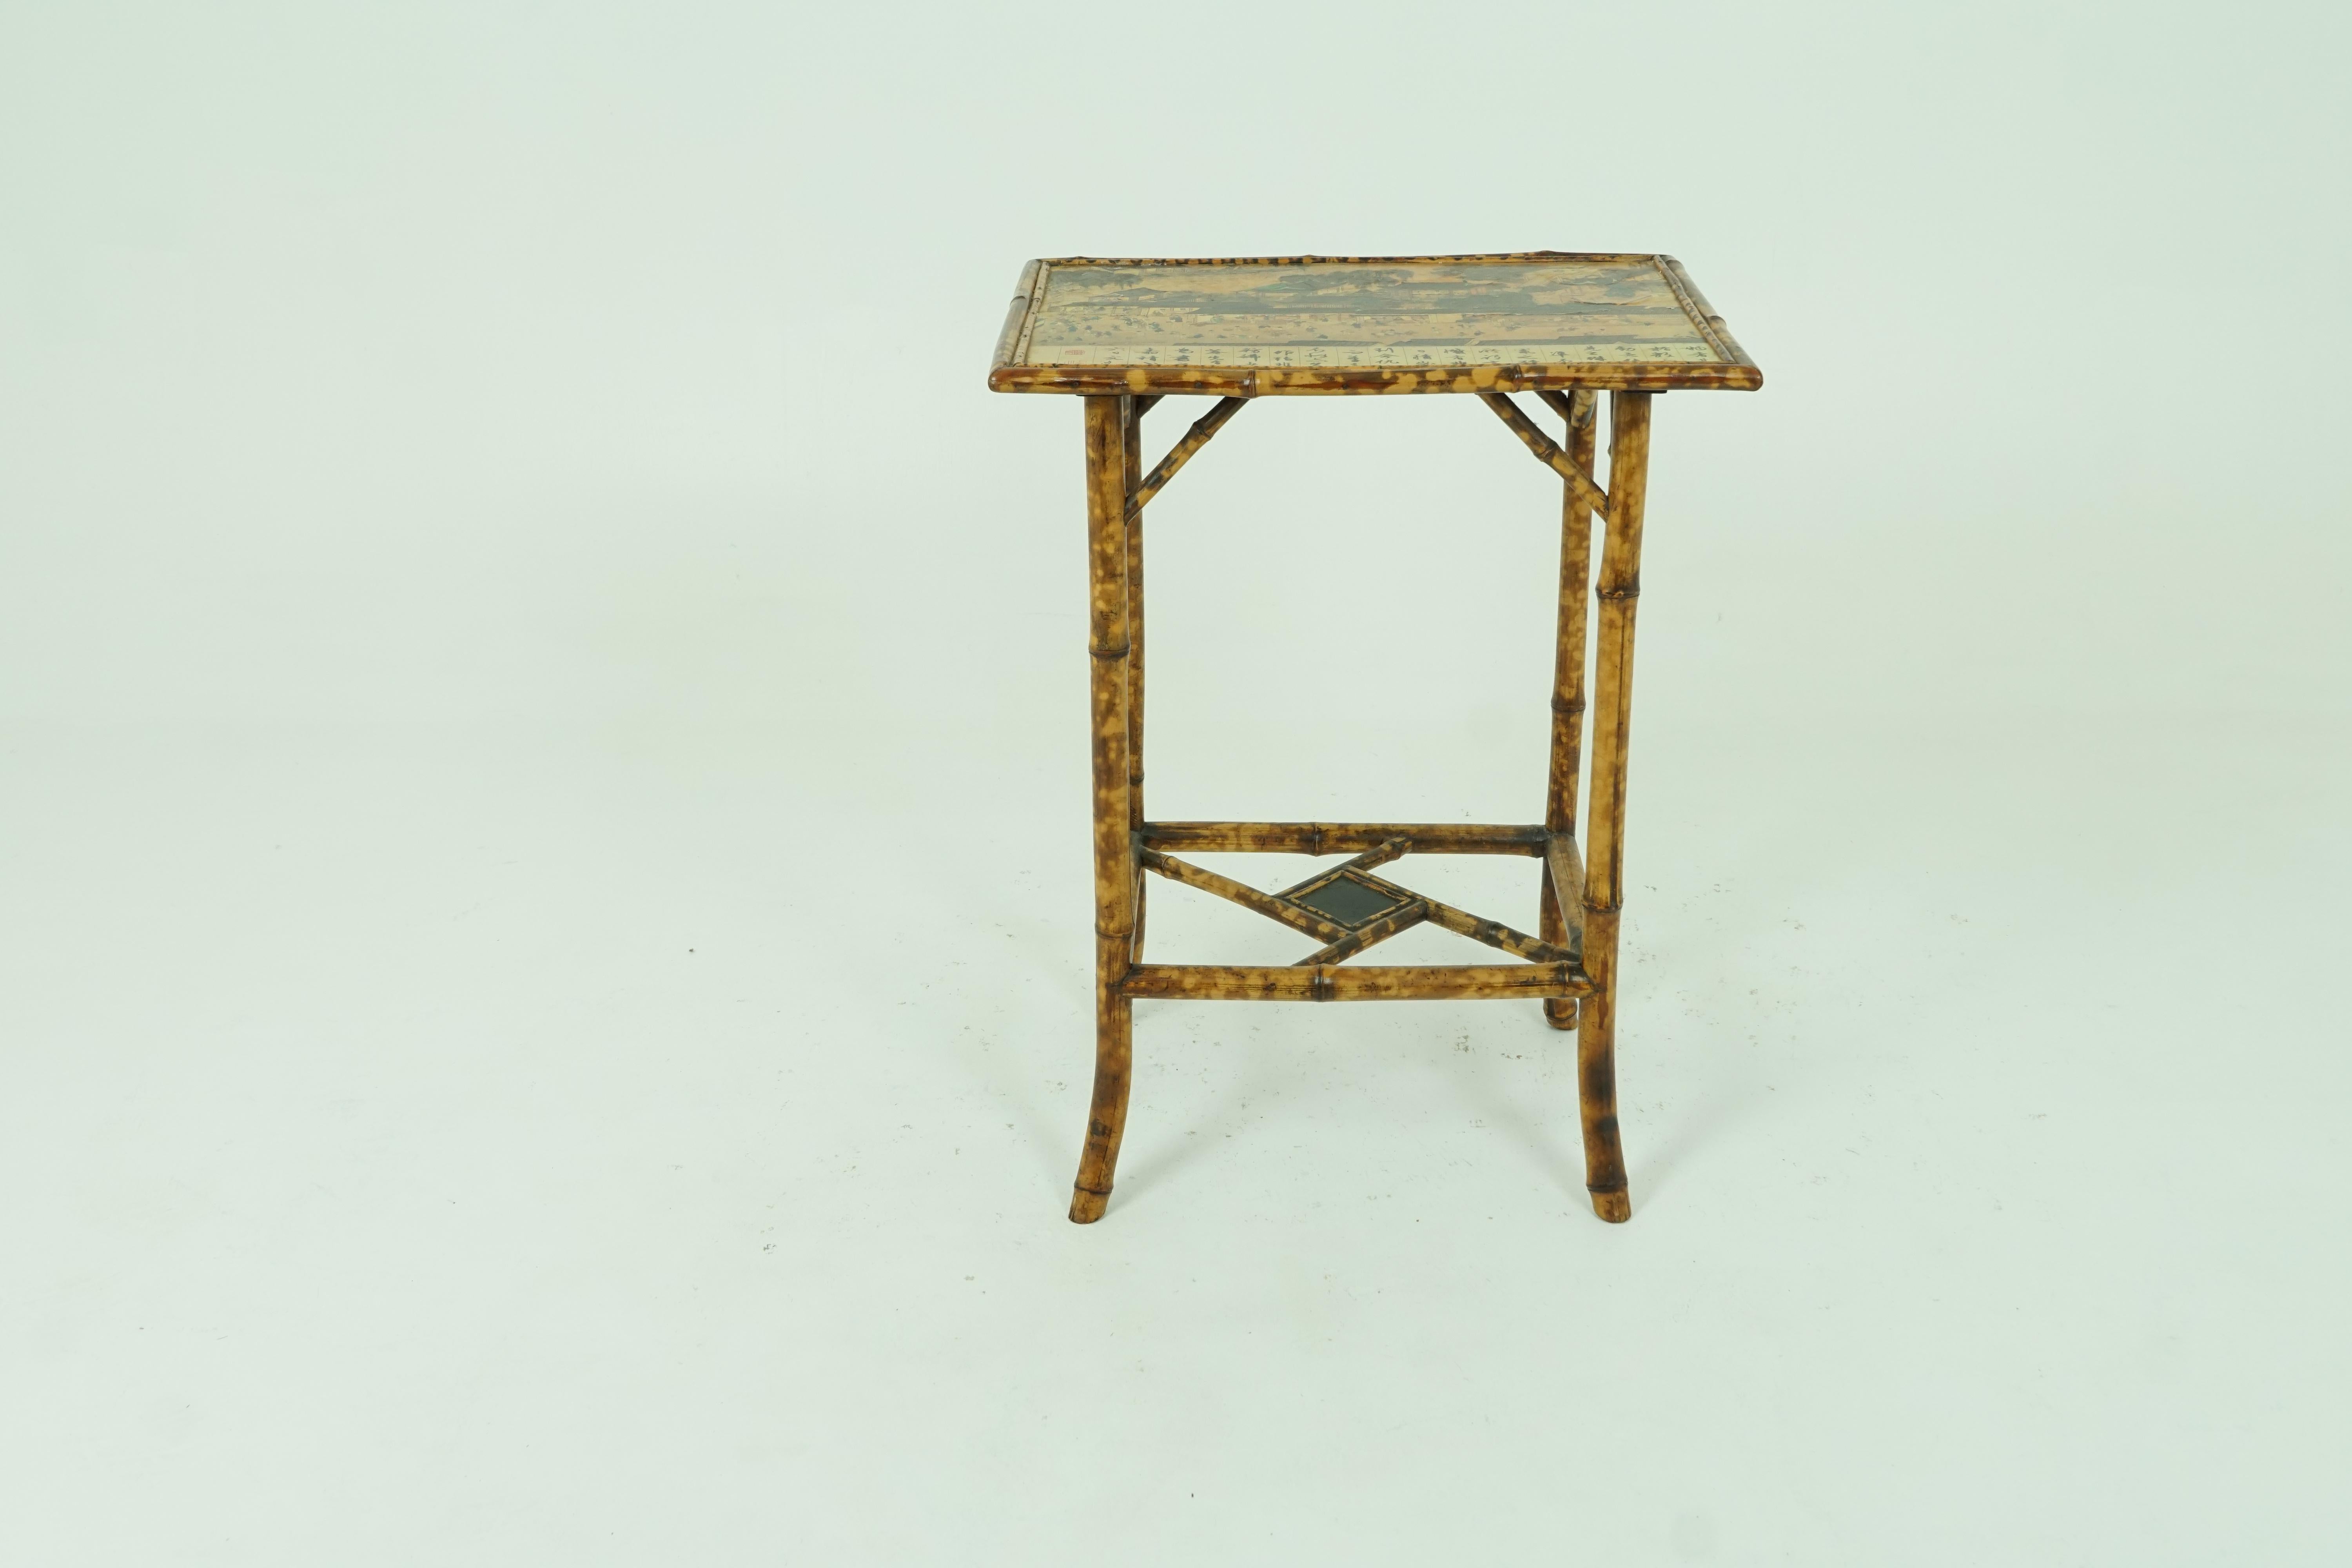 Antique bamboo table, Victorian two-tier Oriental table, antique Furniture, Scotland 1900, B1909

Scotland 1900
Original finish
Rectangular top with oriental theme
Outer trim of bamboo along the top
Standing on four slightly angled